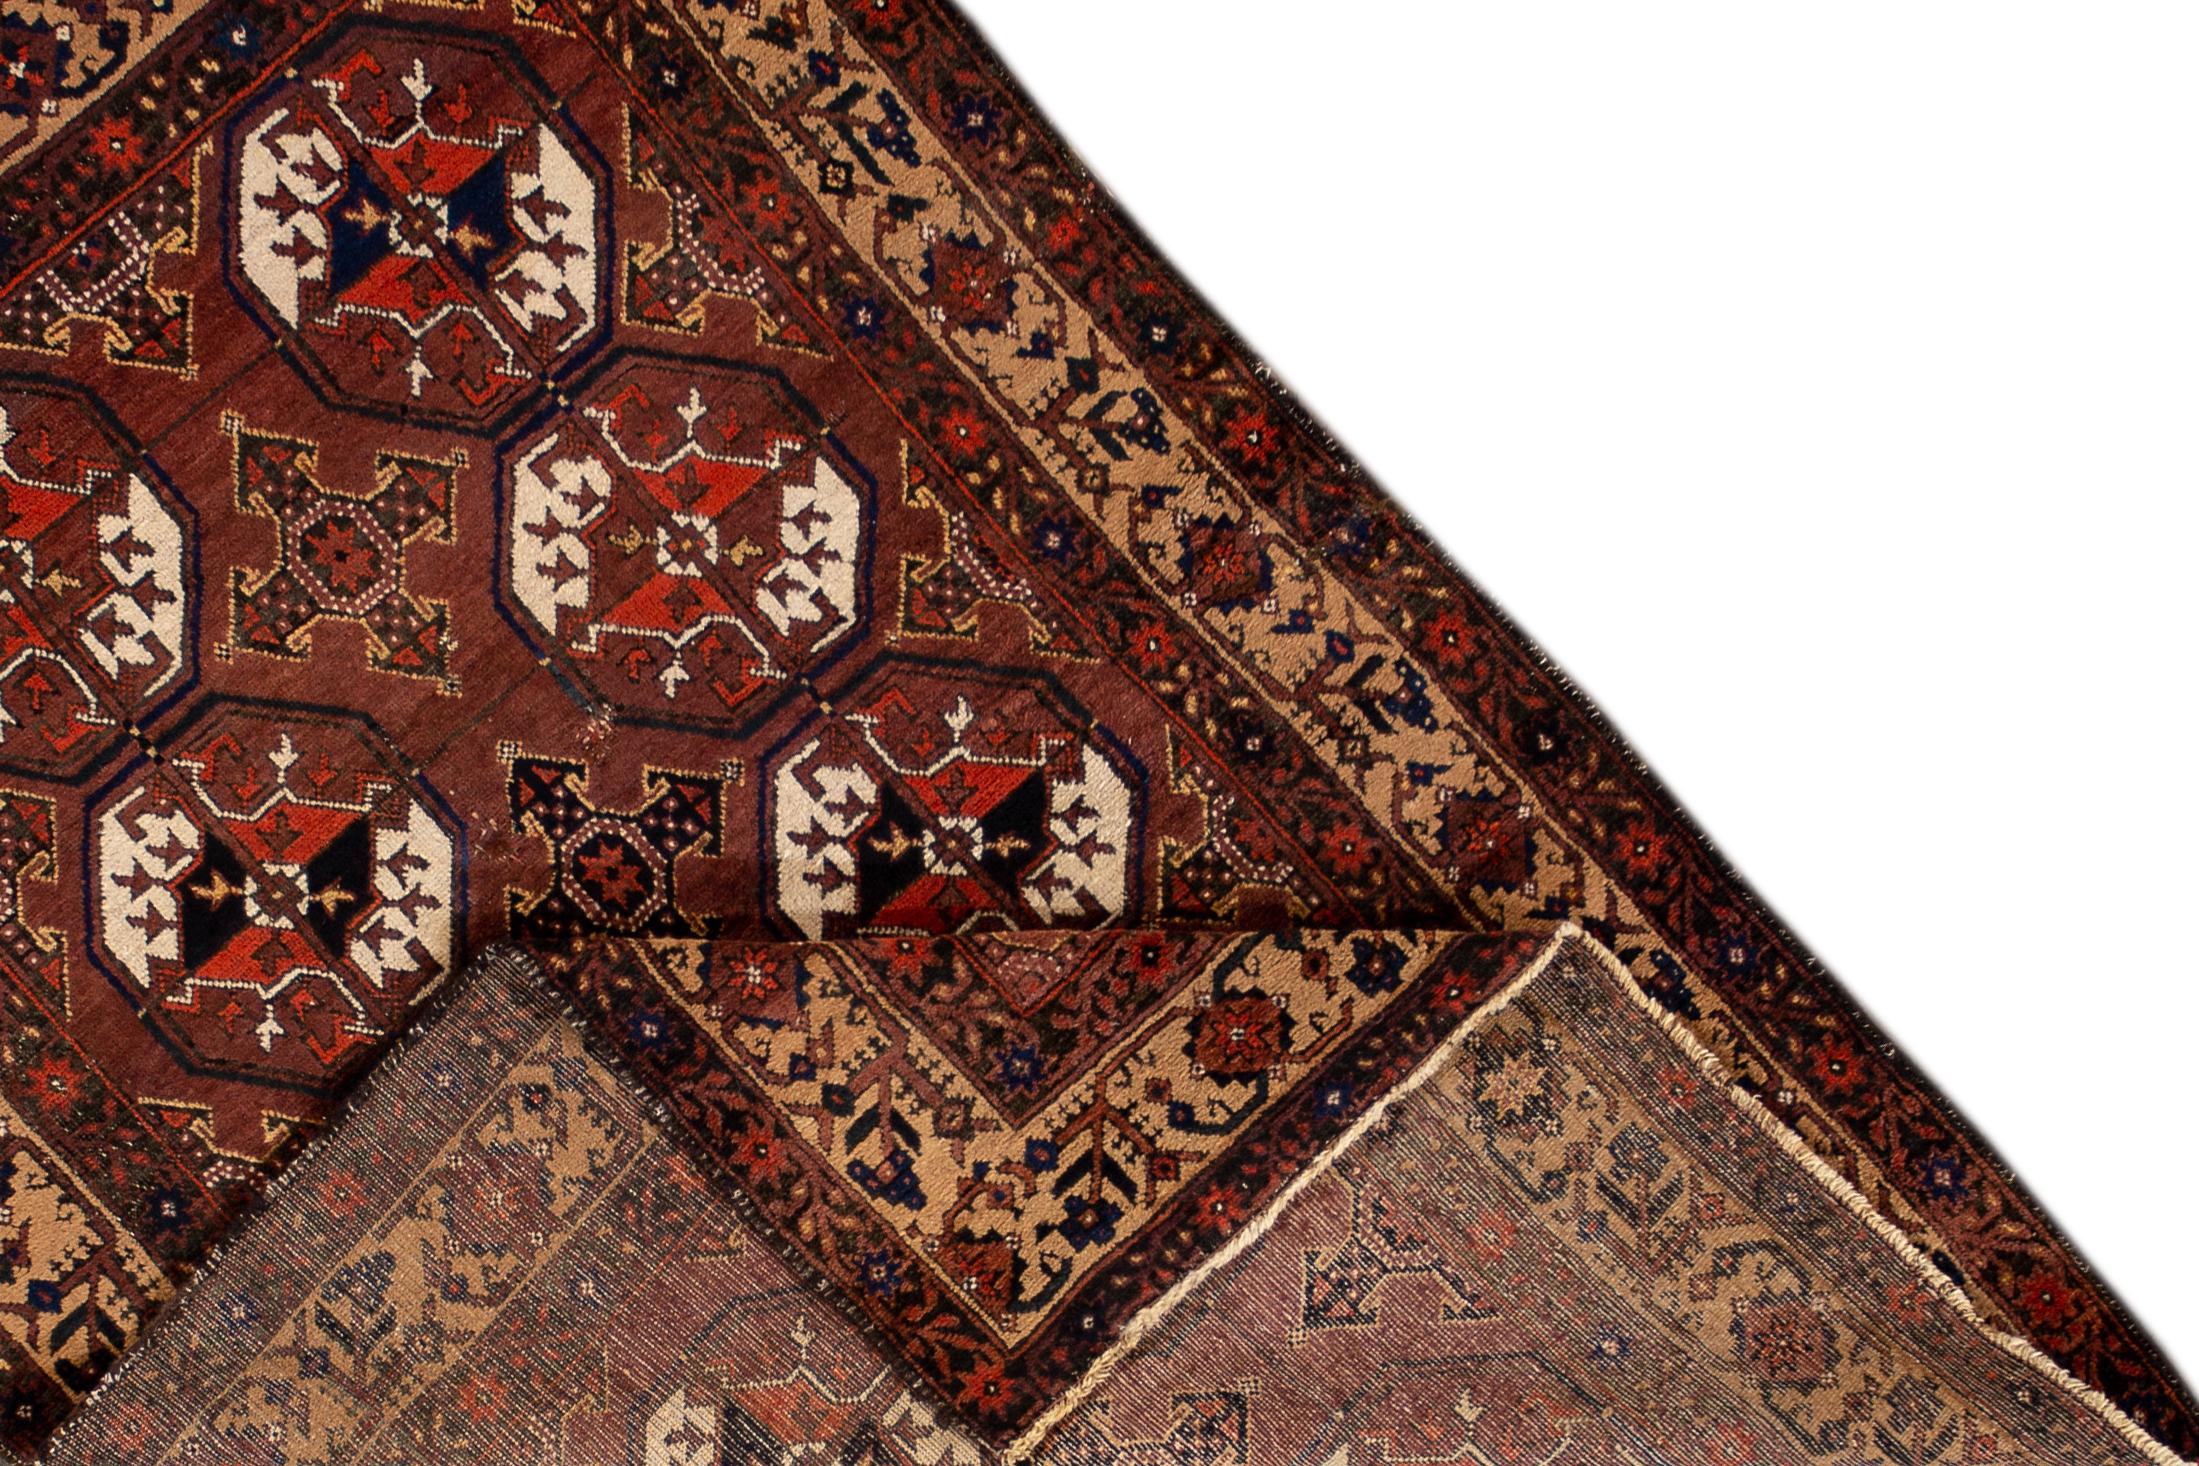 An early 20th century hand knotted antique Turkaman rug with a brown field and repeating octagonal design. This rug measures 3'6